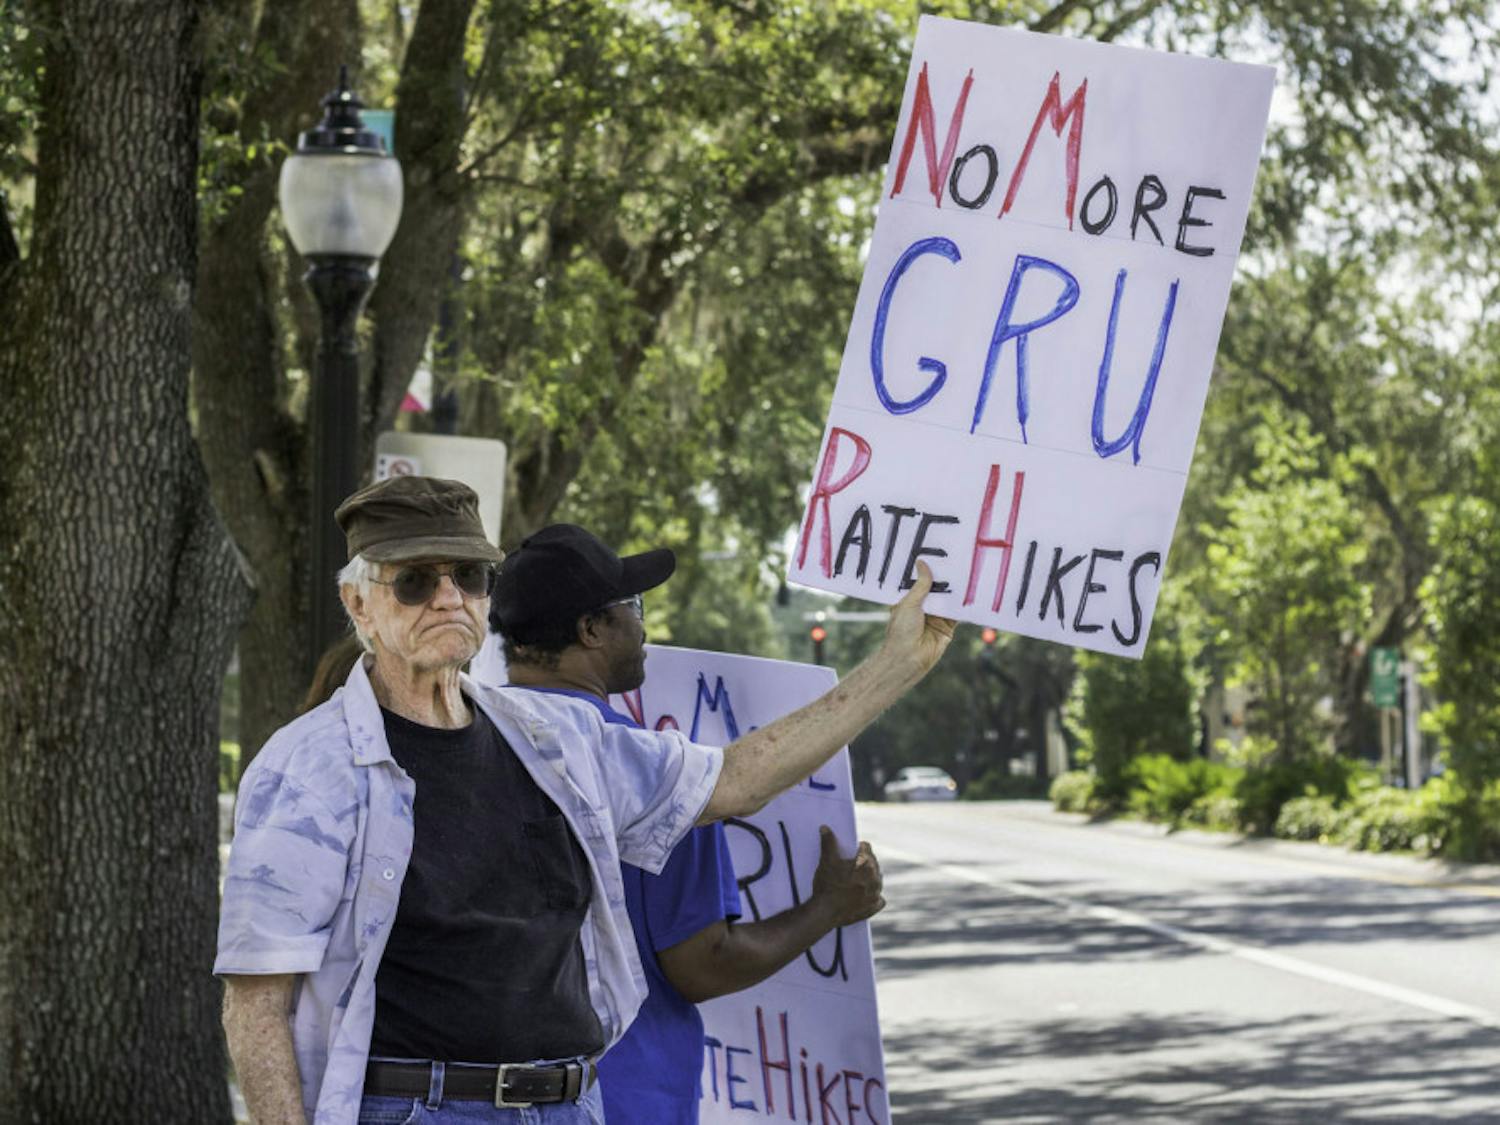 Harold Saive, 75, holds up a protest sign while Jason Davis, 46, stands behind him noon Thursday along University Avenue outside of City Hall. Saive said he believes that most people support the cause but are too timid to protest in person. “For every person who shows up here there’s a thousand behind them who agree,” Saive said.